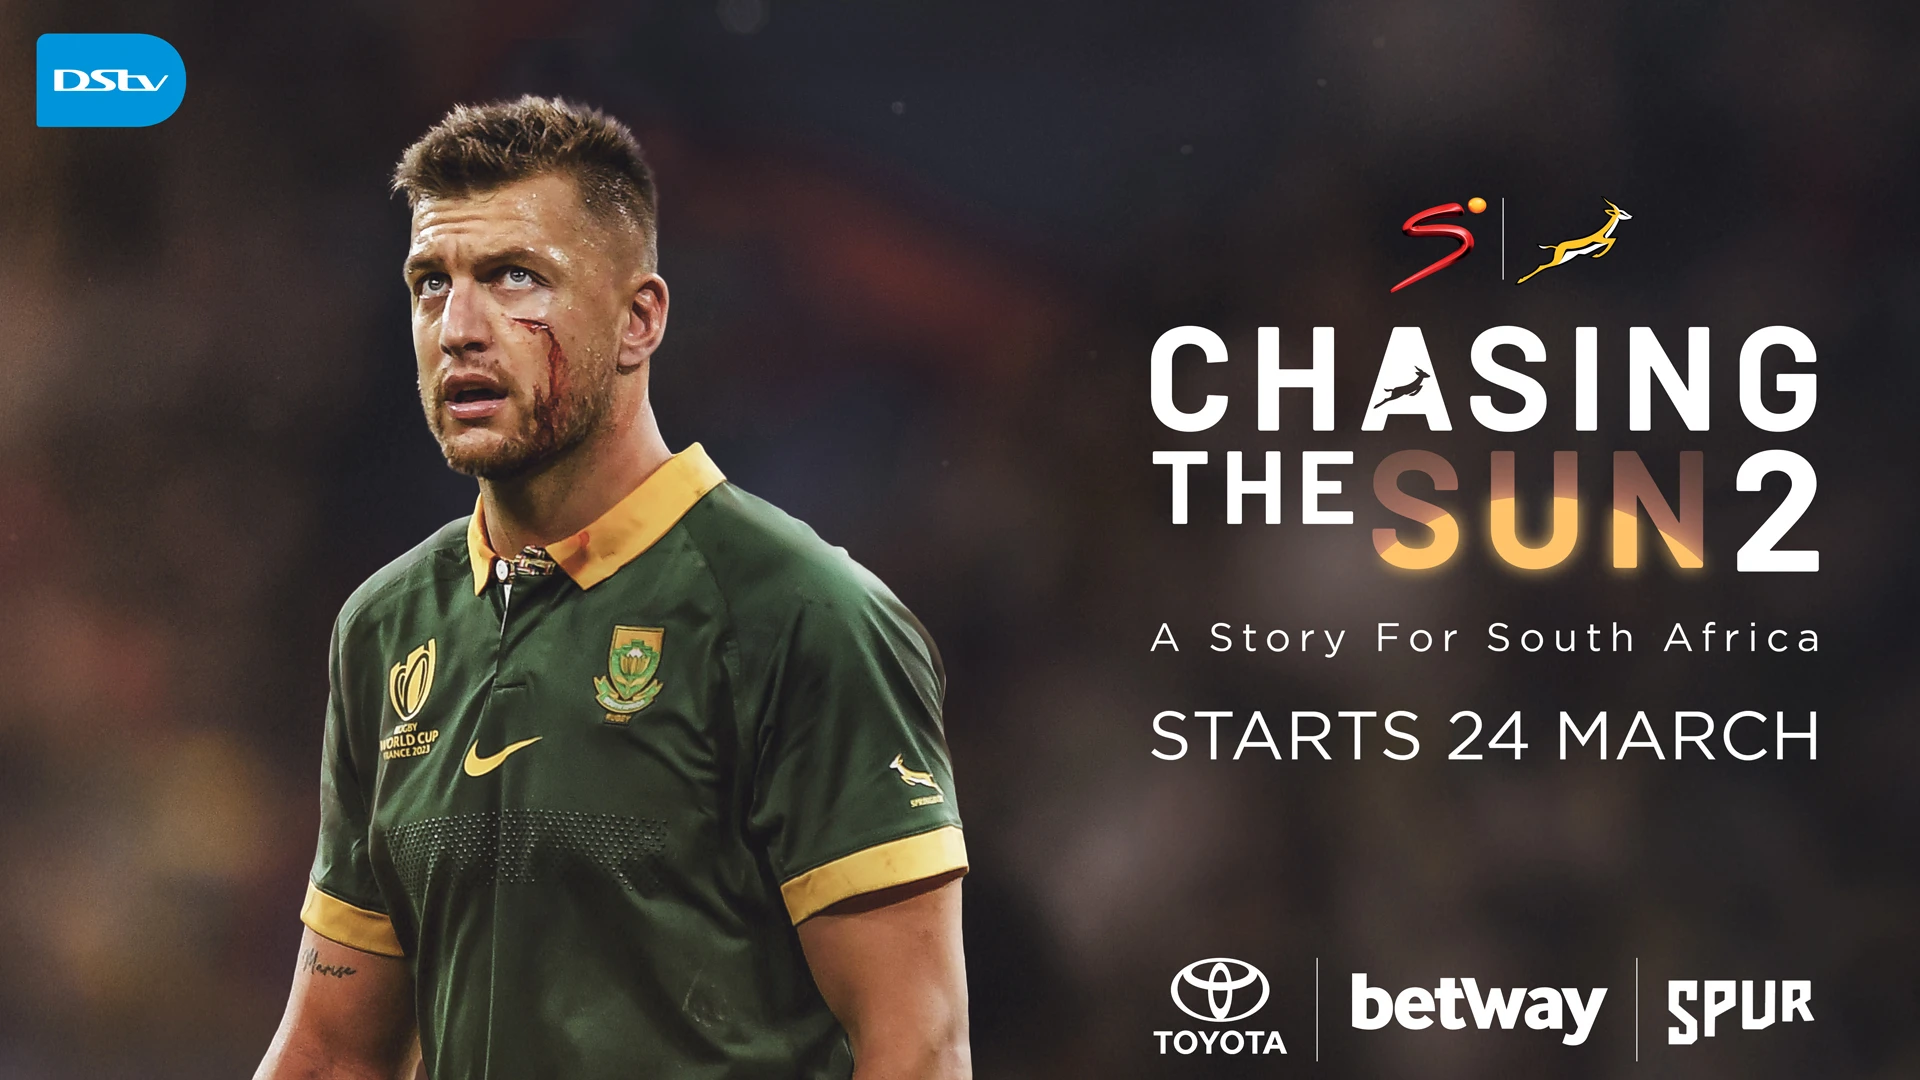 Relive the magic of Chasing the Sun 1 on SuperSport